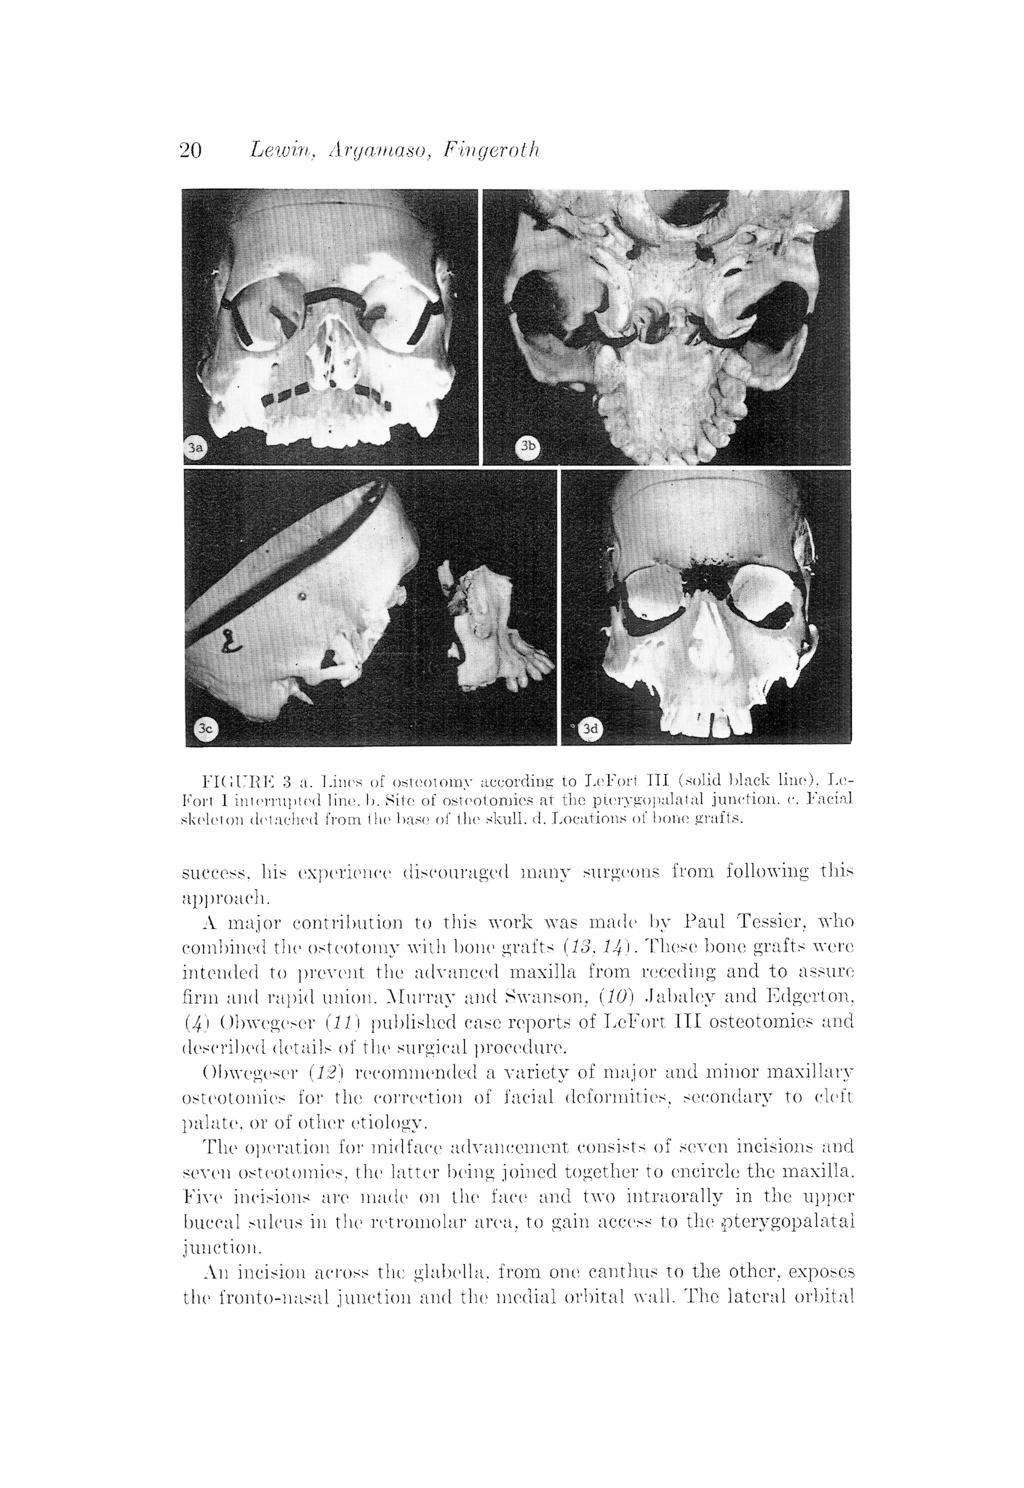 20 Lewin, Argamaso, Fingeroth FIGURE 3 a. Lincs of osteotomy according to LeFort: TII (solid black linc), LeFort 1 interrupted line. b. Site of osteotomies at the pterygopalatal junction. c.